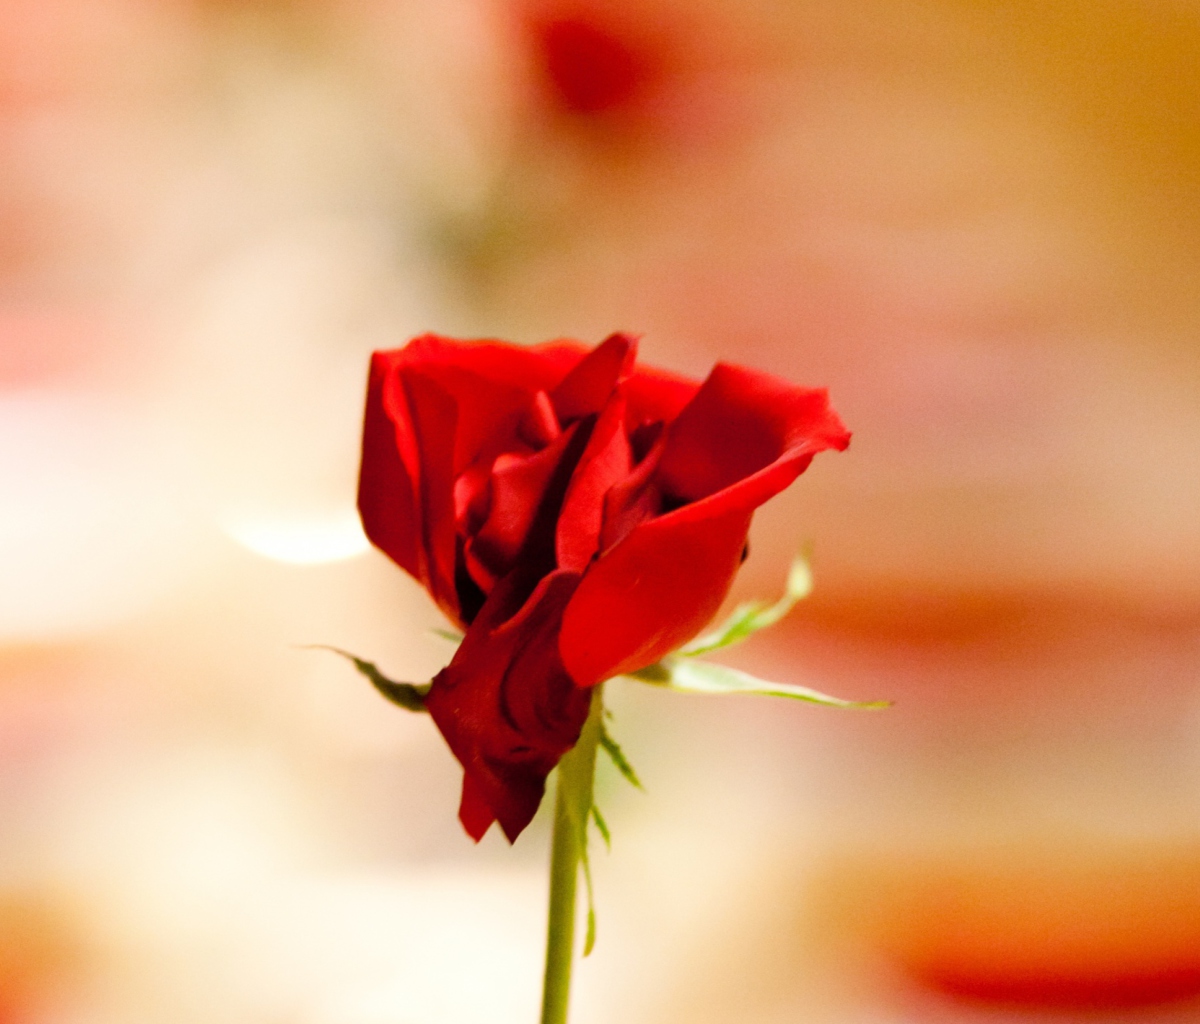 One Red Rose For You wallpaper 1200x1024